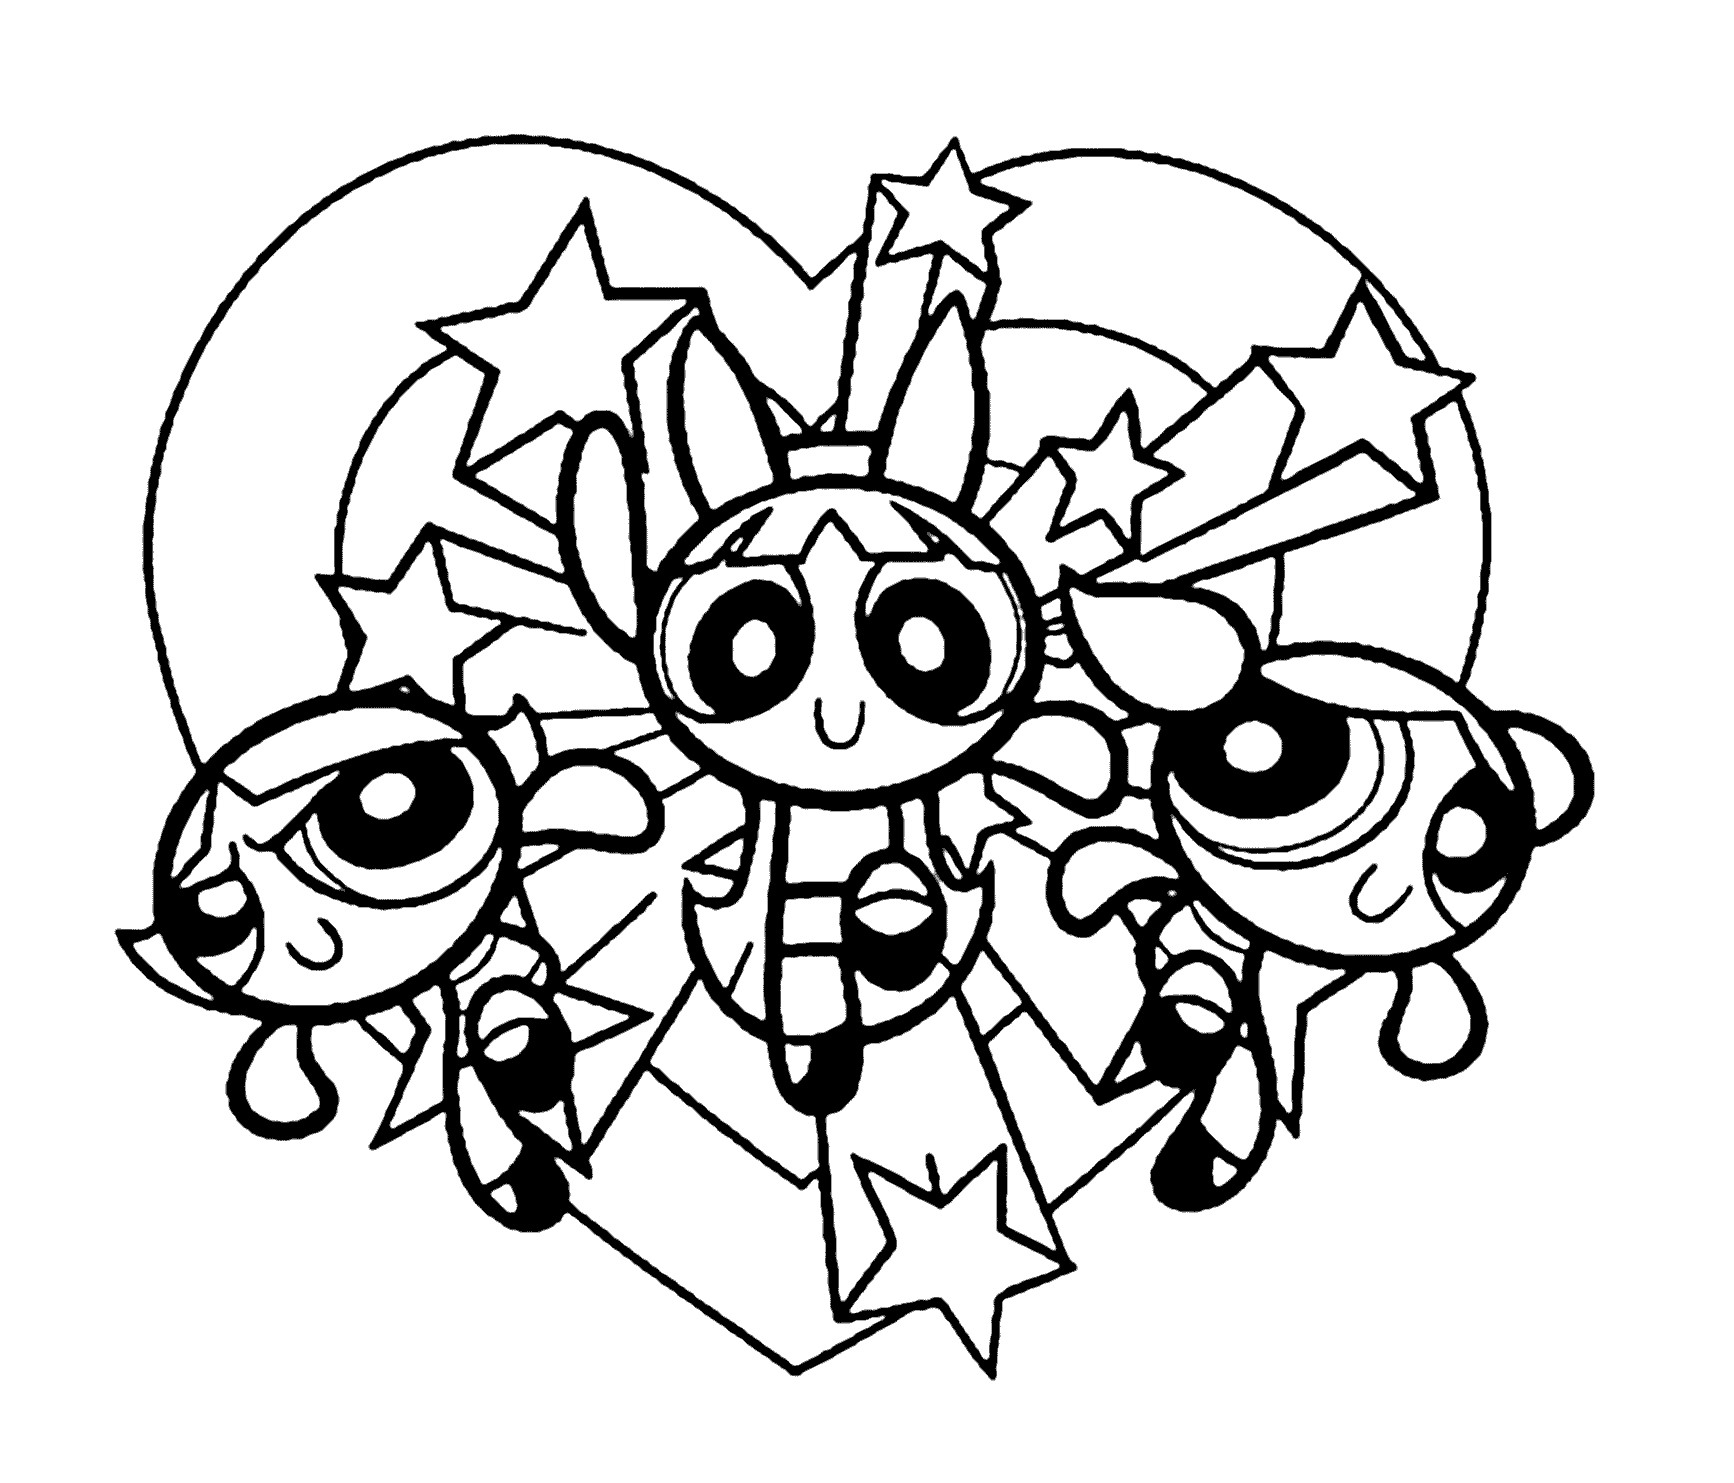 Power Puff Girls Coloring Pages
 Coloring Pages For Girls 9 10